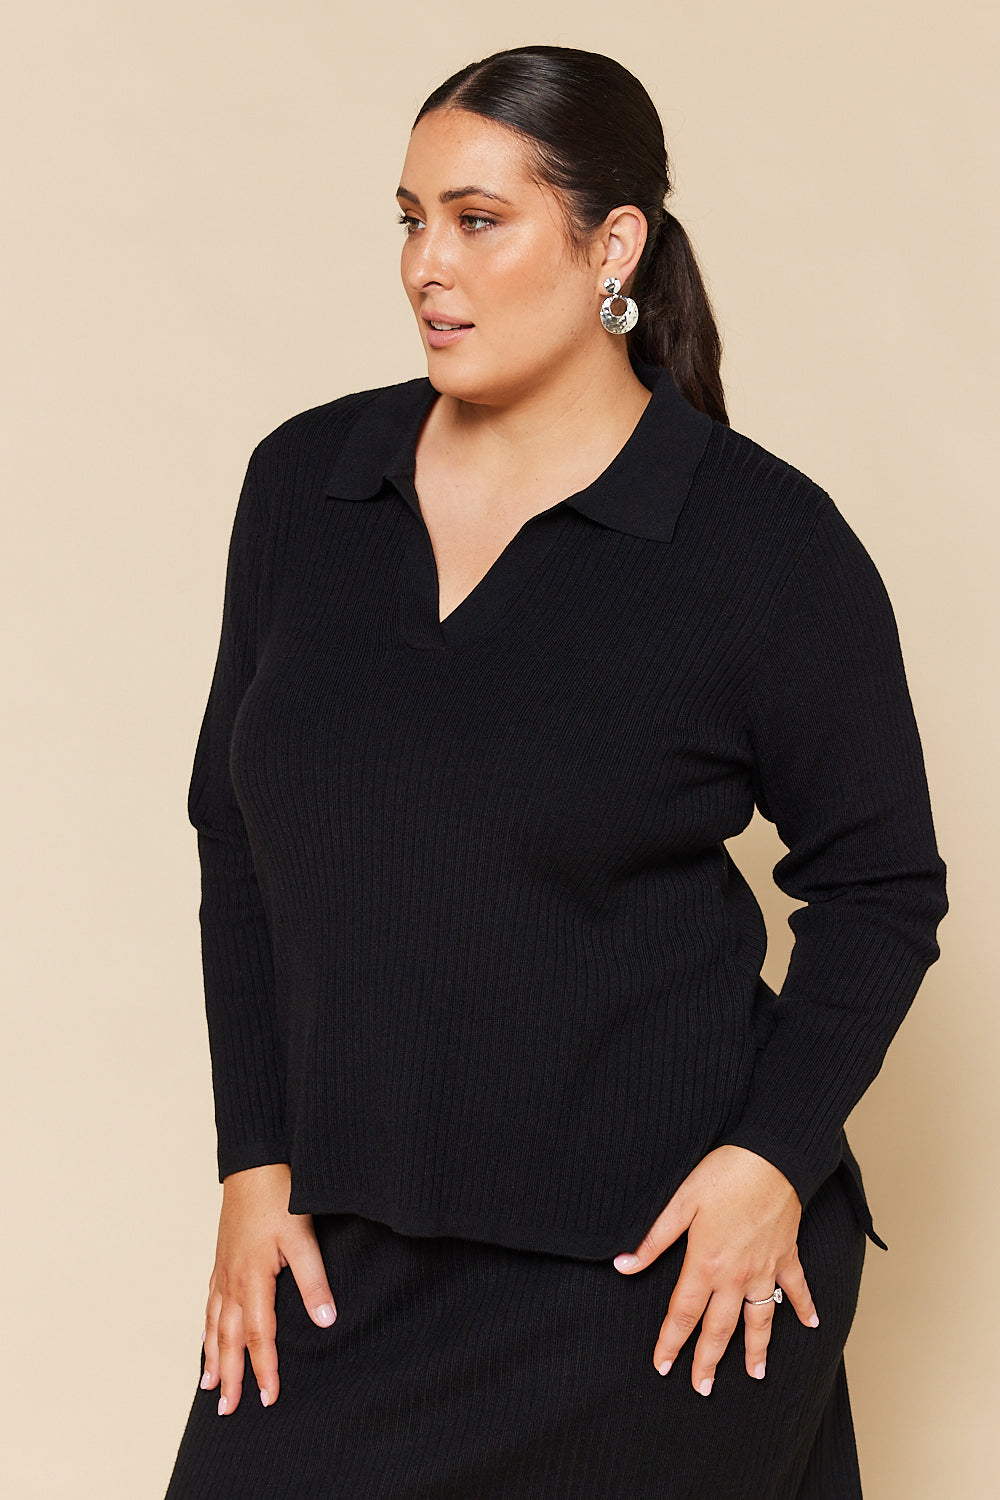 Collared Knitted Top in Black